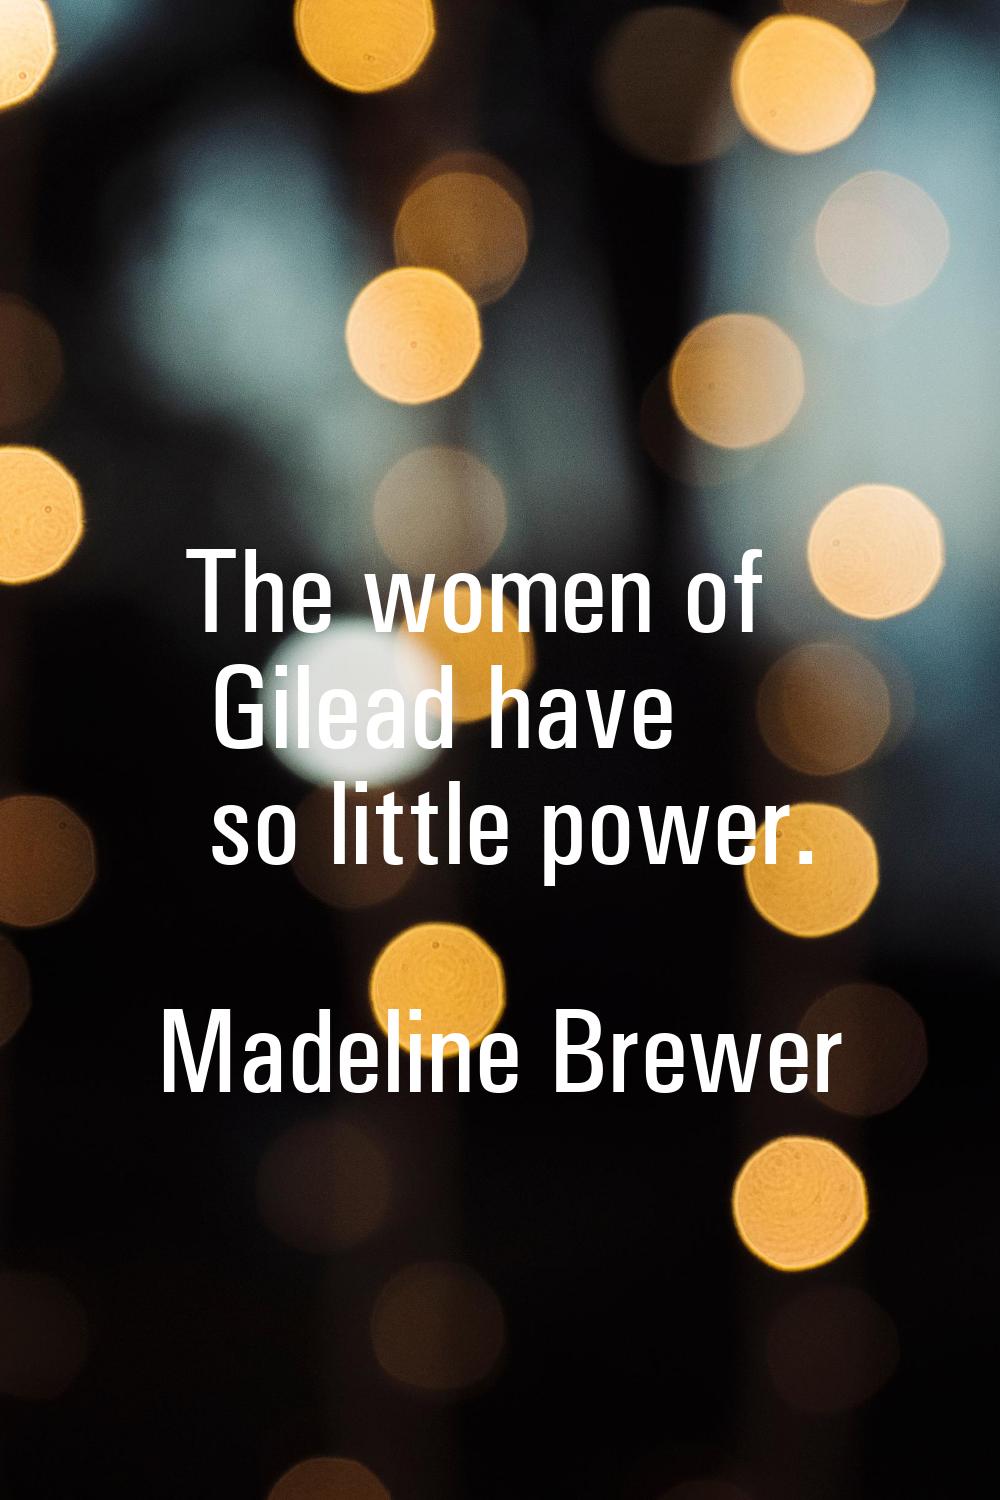 The women of Gilead have so little power.